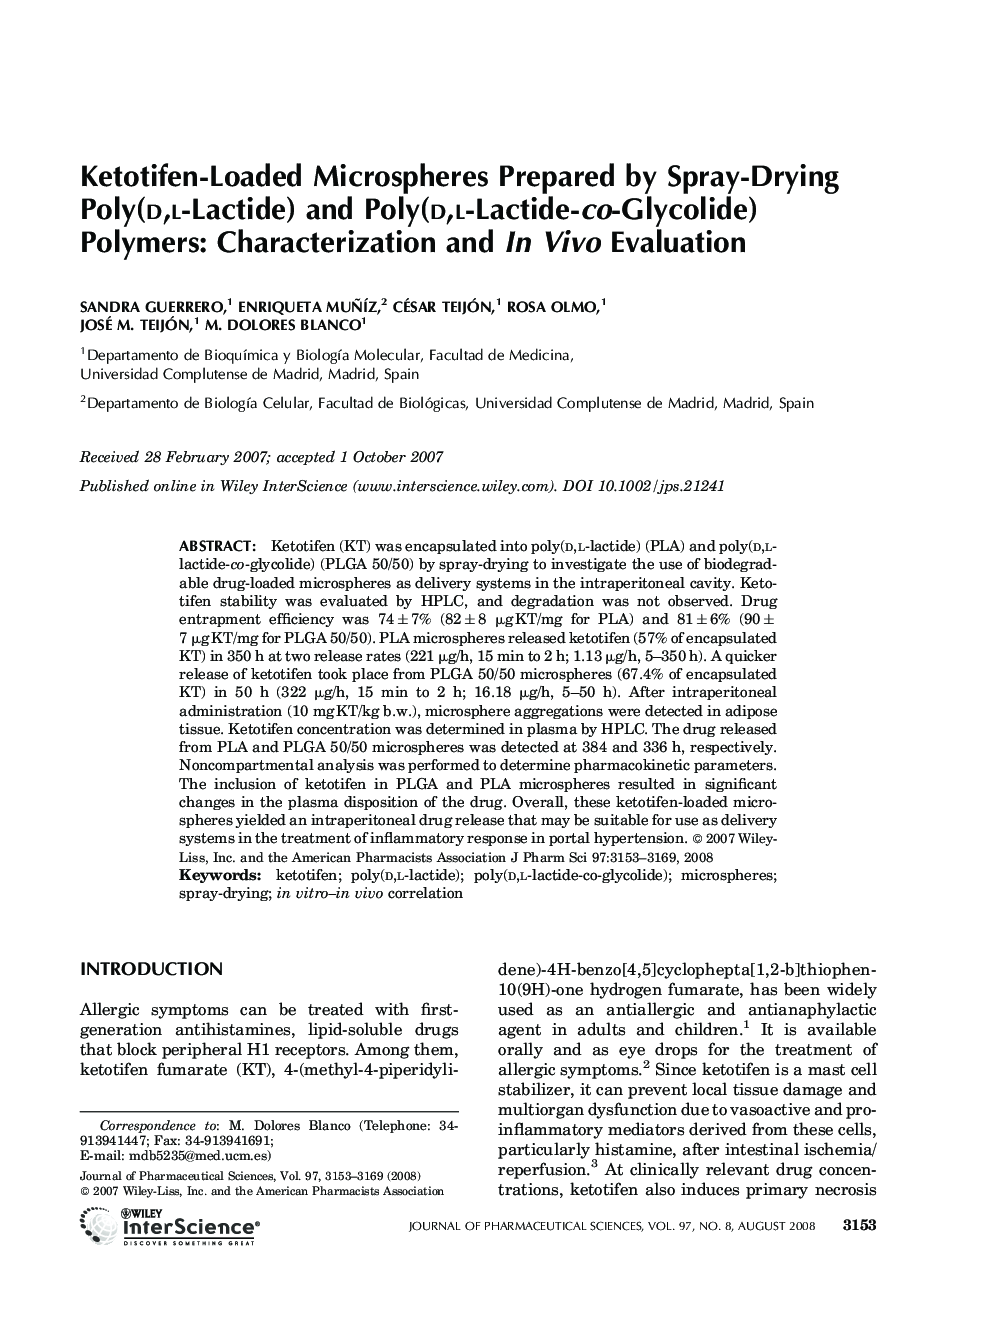 Ketotifen-Loaded Microspheres Prepared by Spray-Drying Poly (D,L-Lactide) and Poly(D,L-Lactide-co-Glycolide) Polymers: Characterization and In Vivo Evaluation